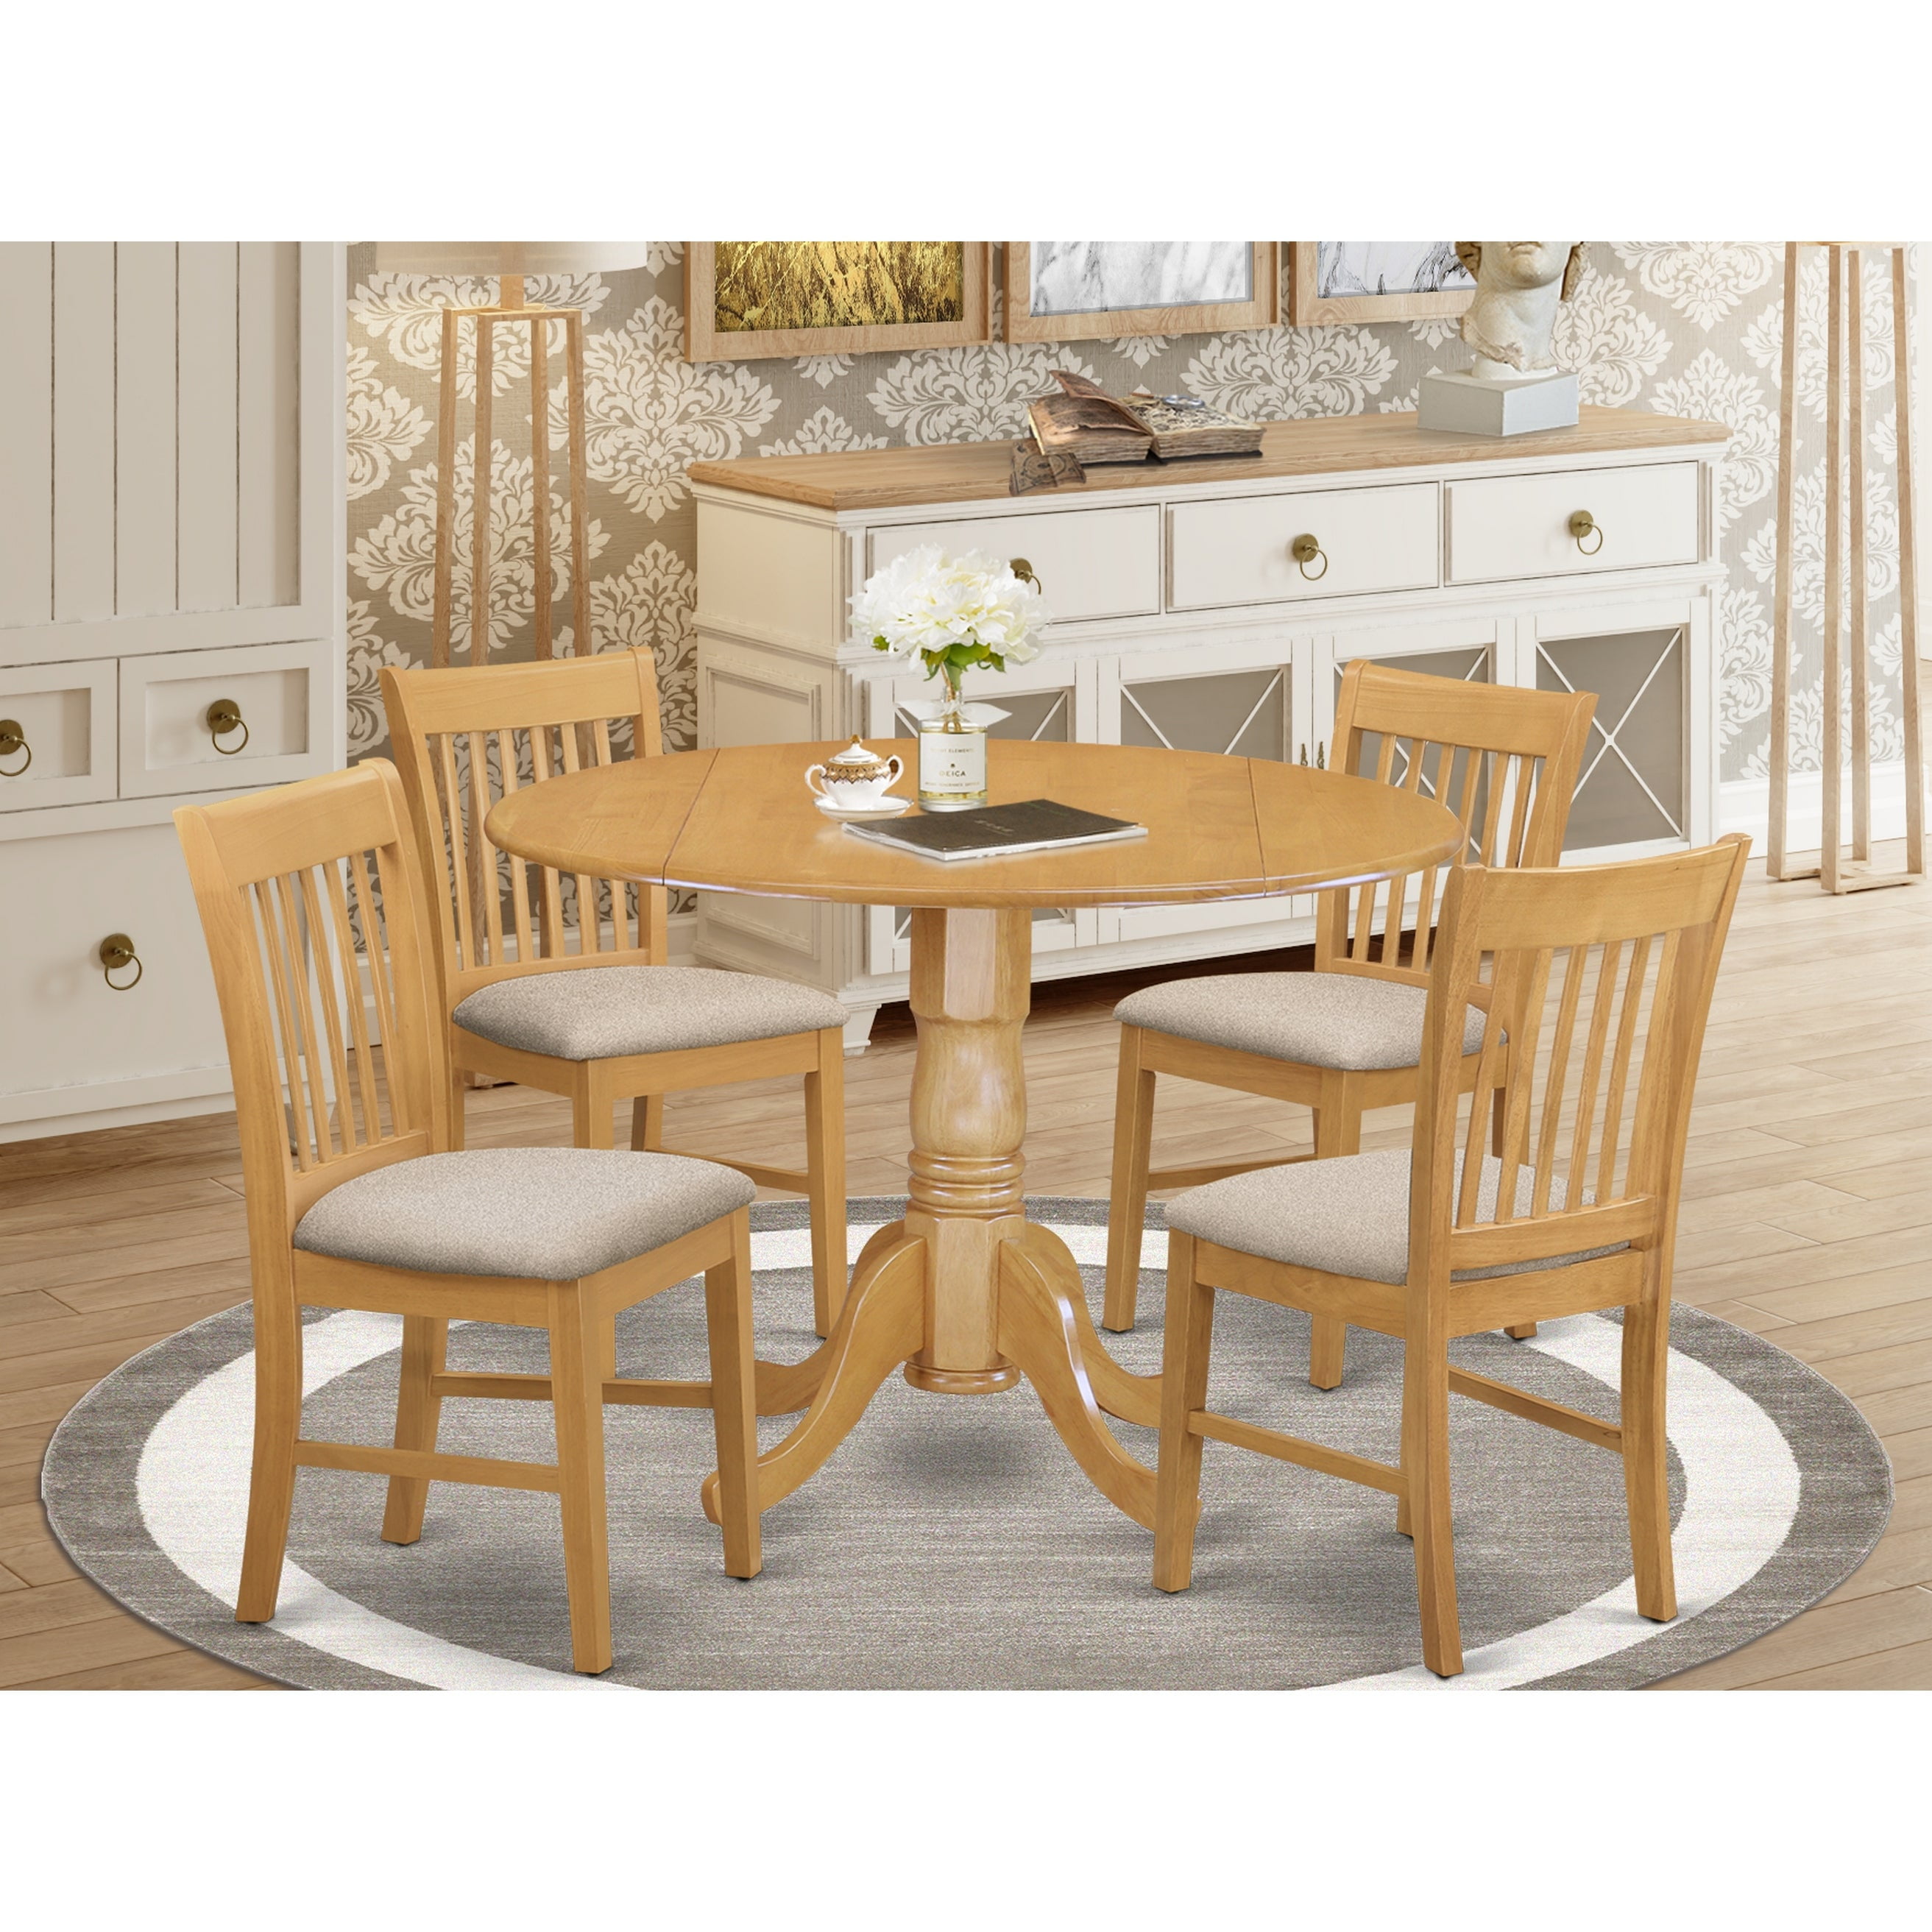 East West Furniture Oak Round Kitchen Table And 4 Chairs 5Piece Dining